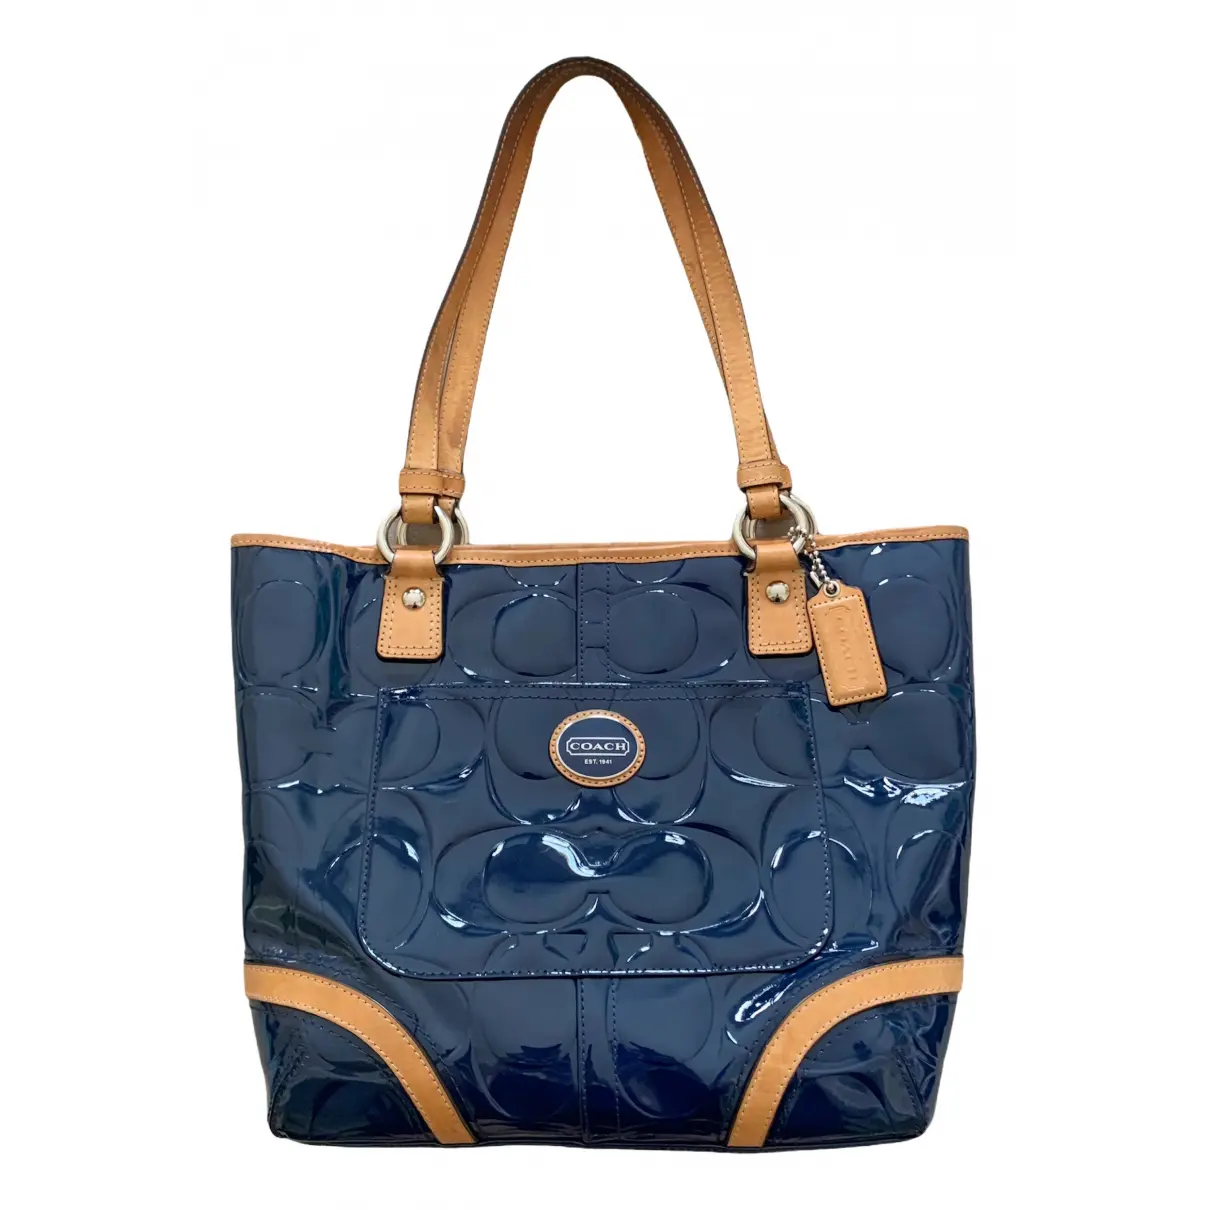 CITY ZIP TOTE patent leather tote Coach